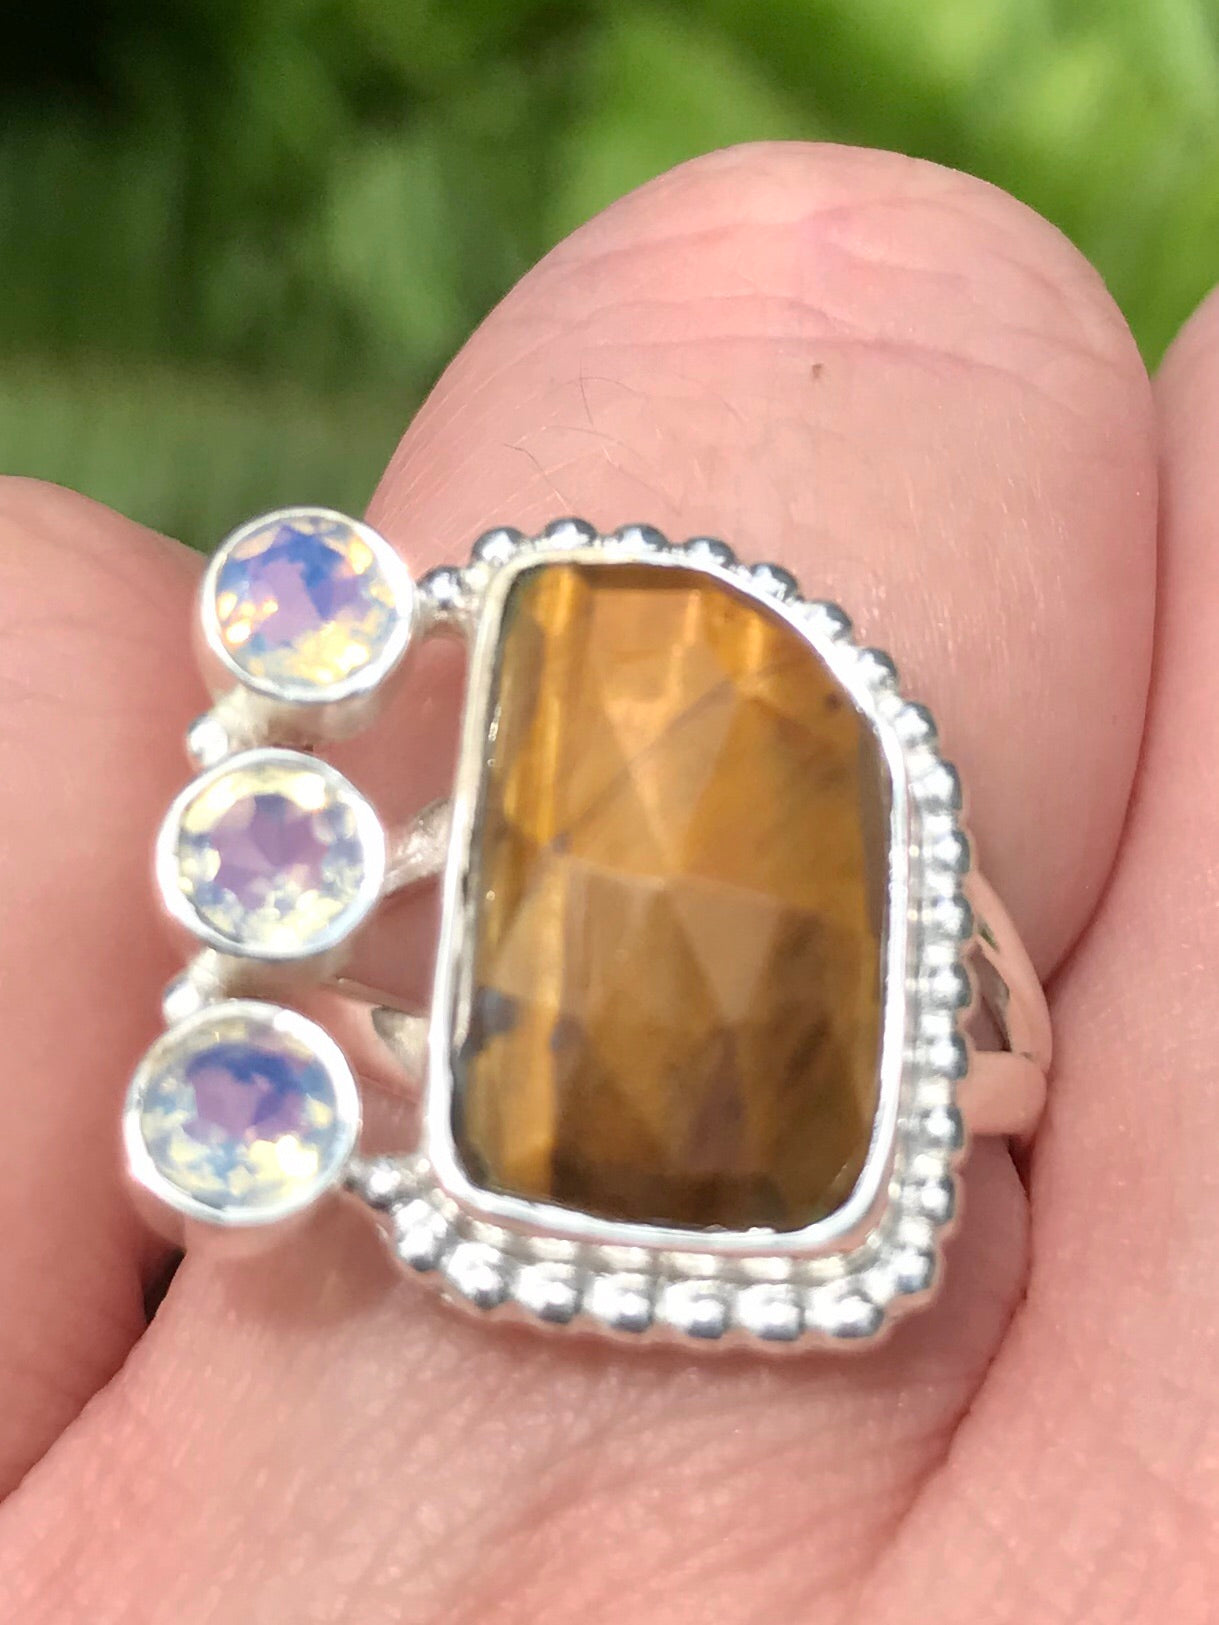 Tigers Eye and Opalite Ring Size 6.25 - Morganna’s Treasures 